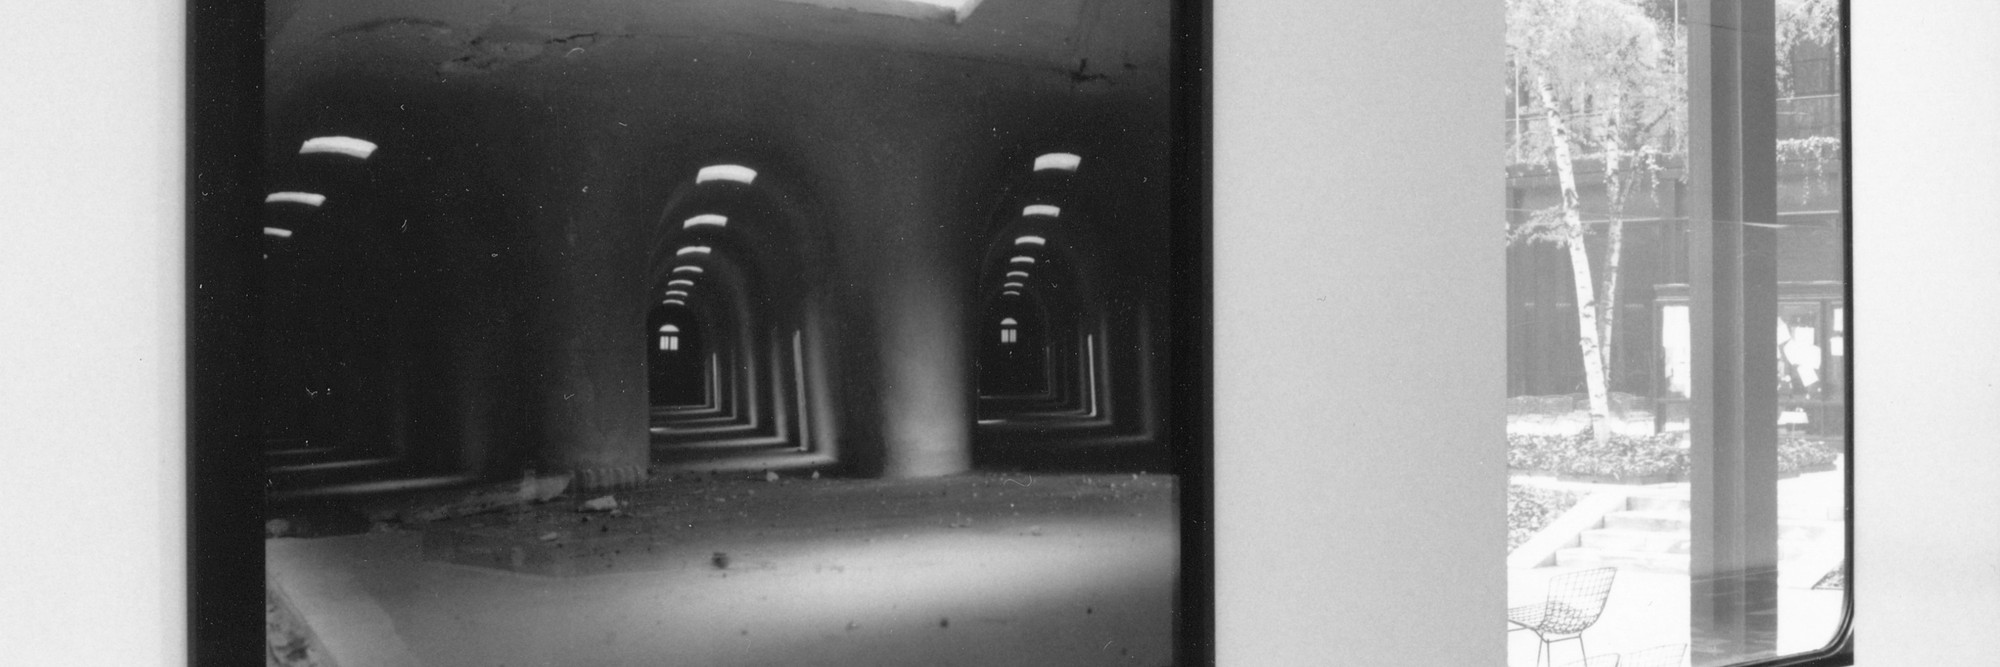 James Casebere. Tunnels. 1995. Cibachrome, 48 × 61 1/2″. Collection Lois and Richard Plehn. Installation view of Projects 59: Architecture as Metaphor at The Museum of Modern Art, New York, April 10–June 3, 1997. Photo: Erik Landsberg